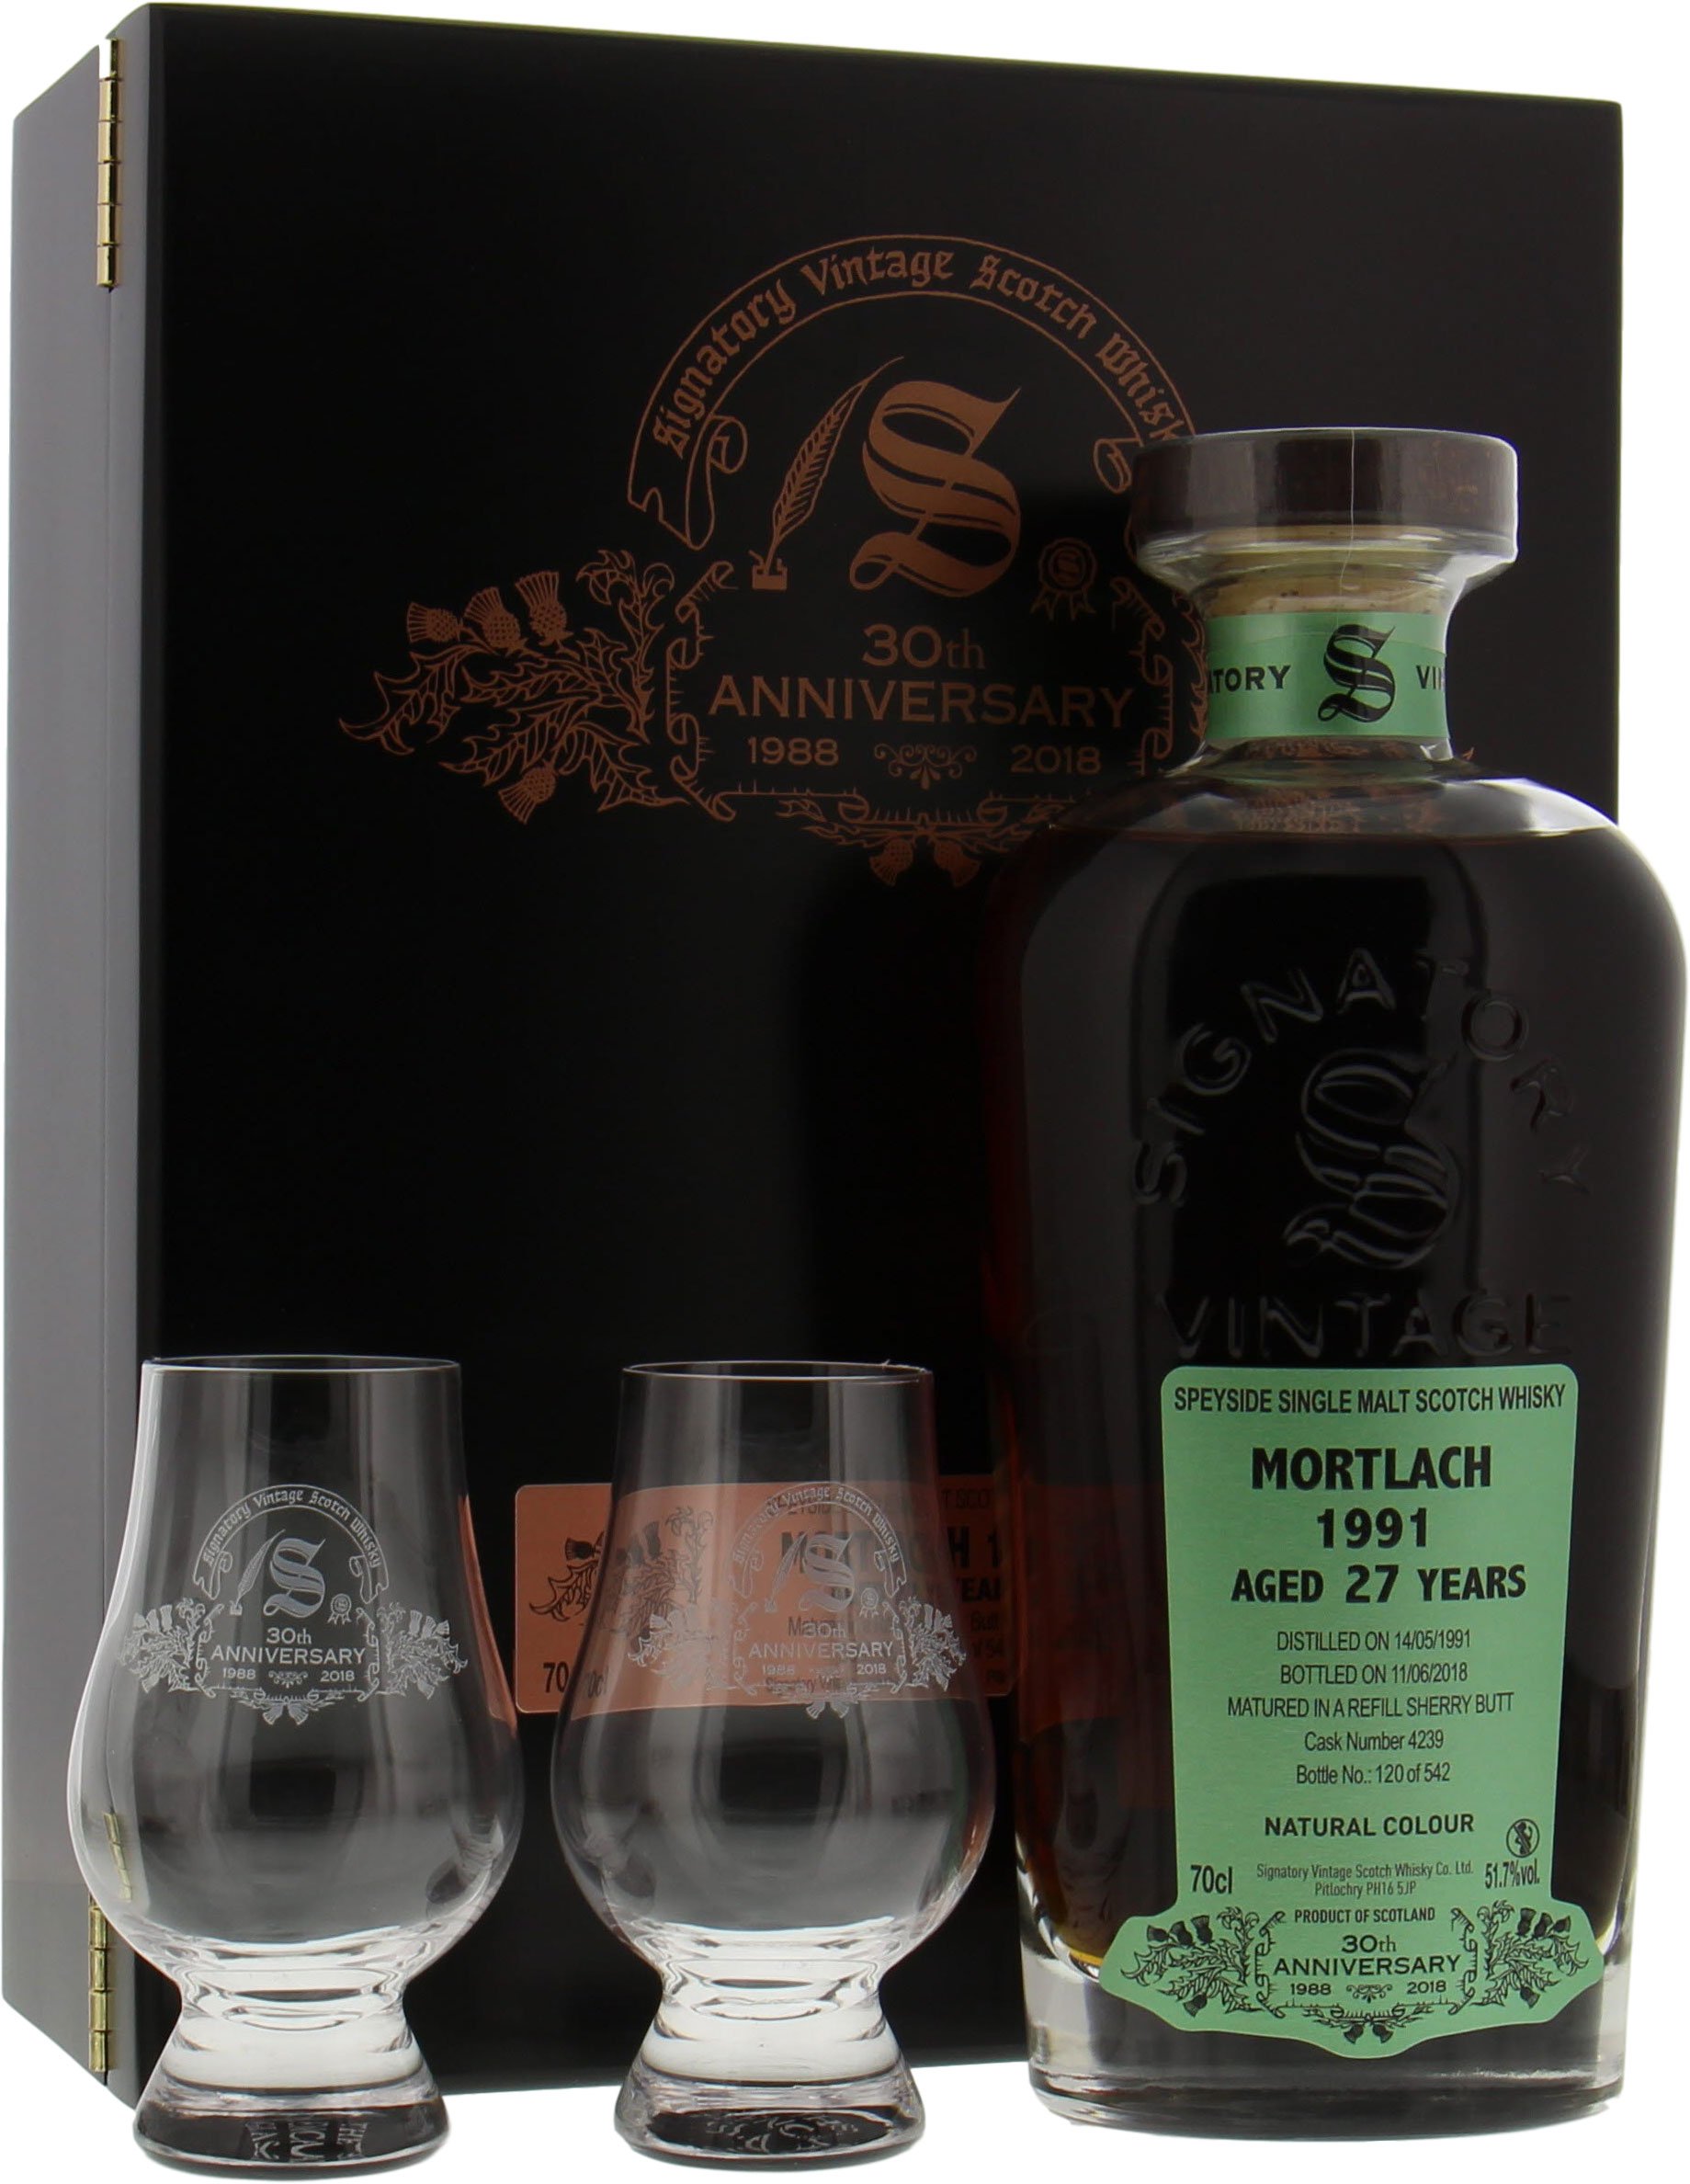 Mortlach - 27 Years Old Signatory 30th Anniversary Cask 4239 51.7% 1991 In Original Wooden Container